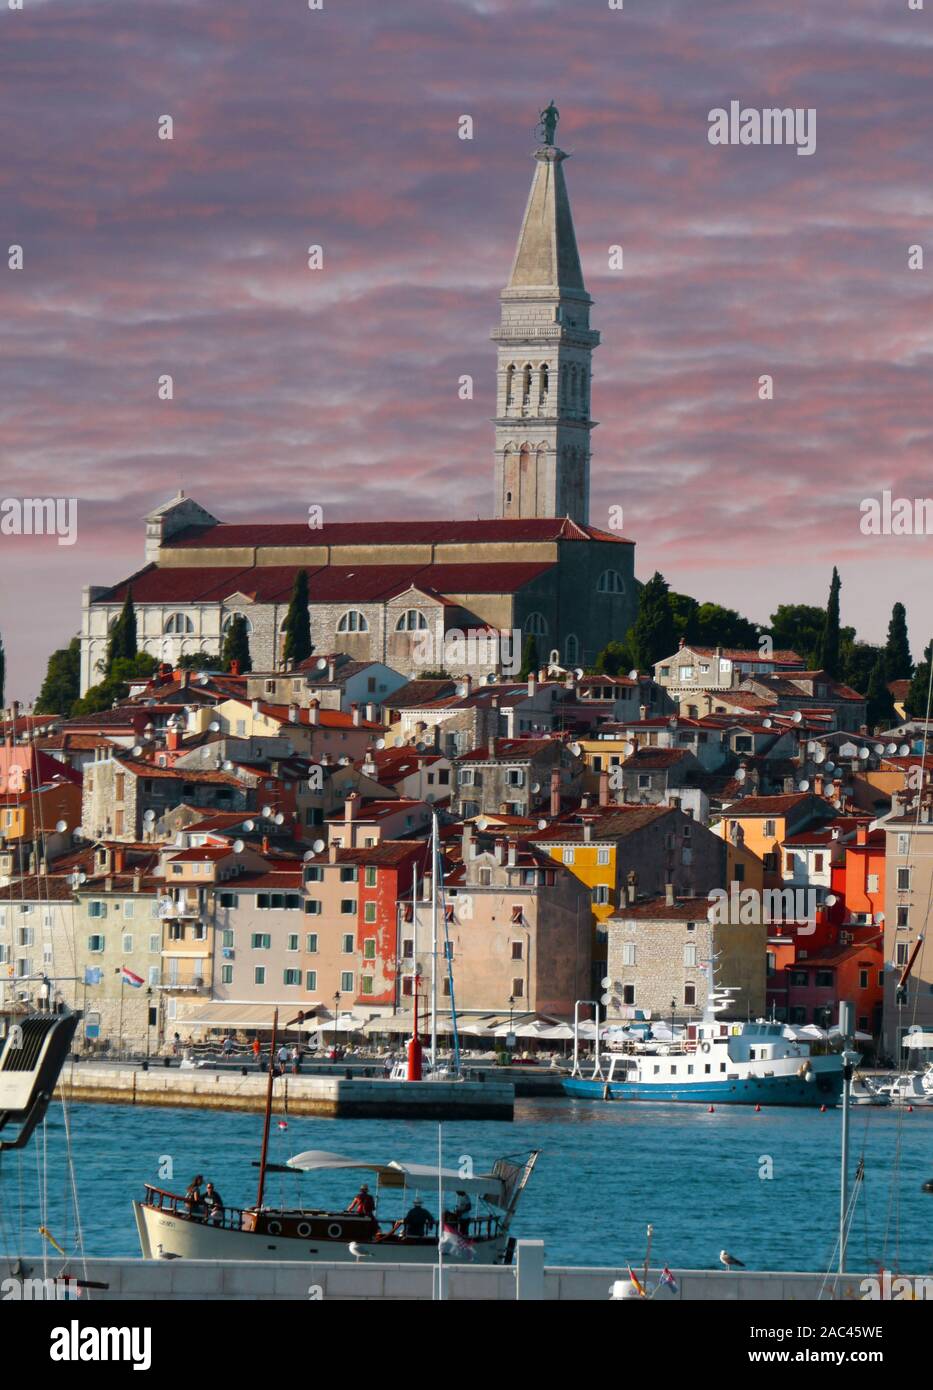 Old town architecture and Adriatic sea surrounds Venetian old town of Rovinj, Istria peninsula. Stock Photo